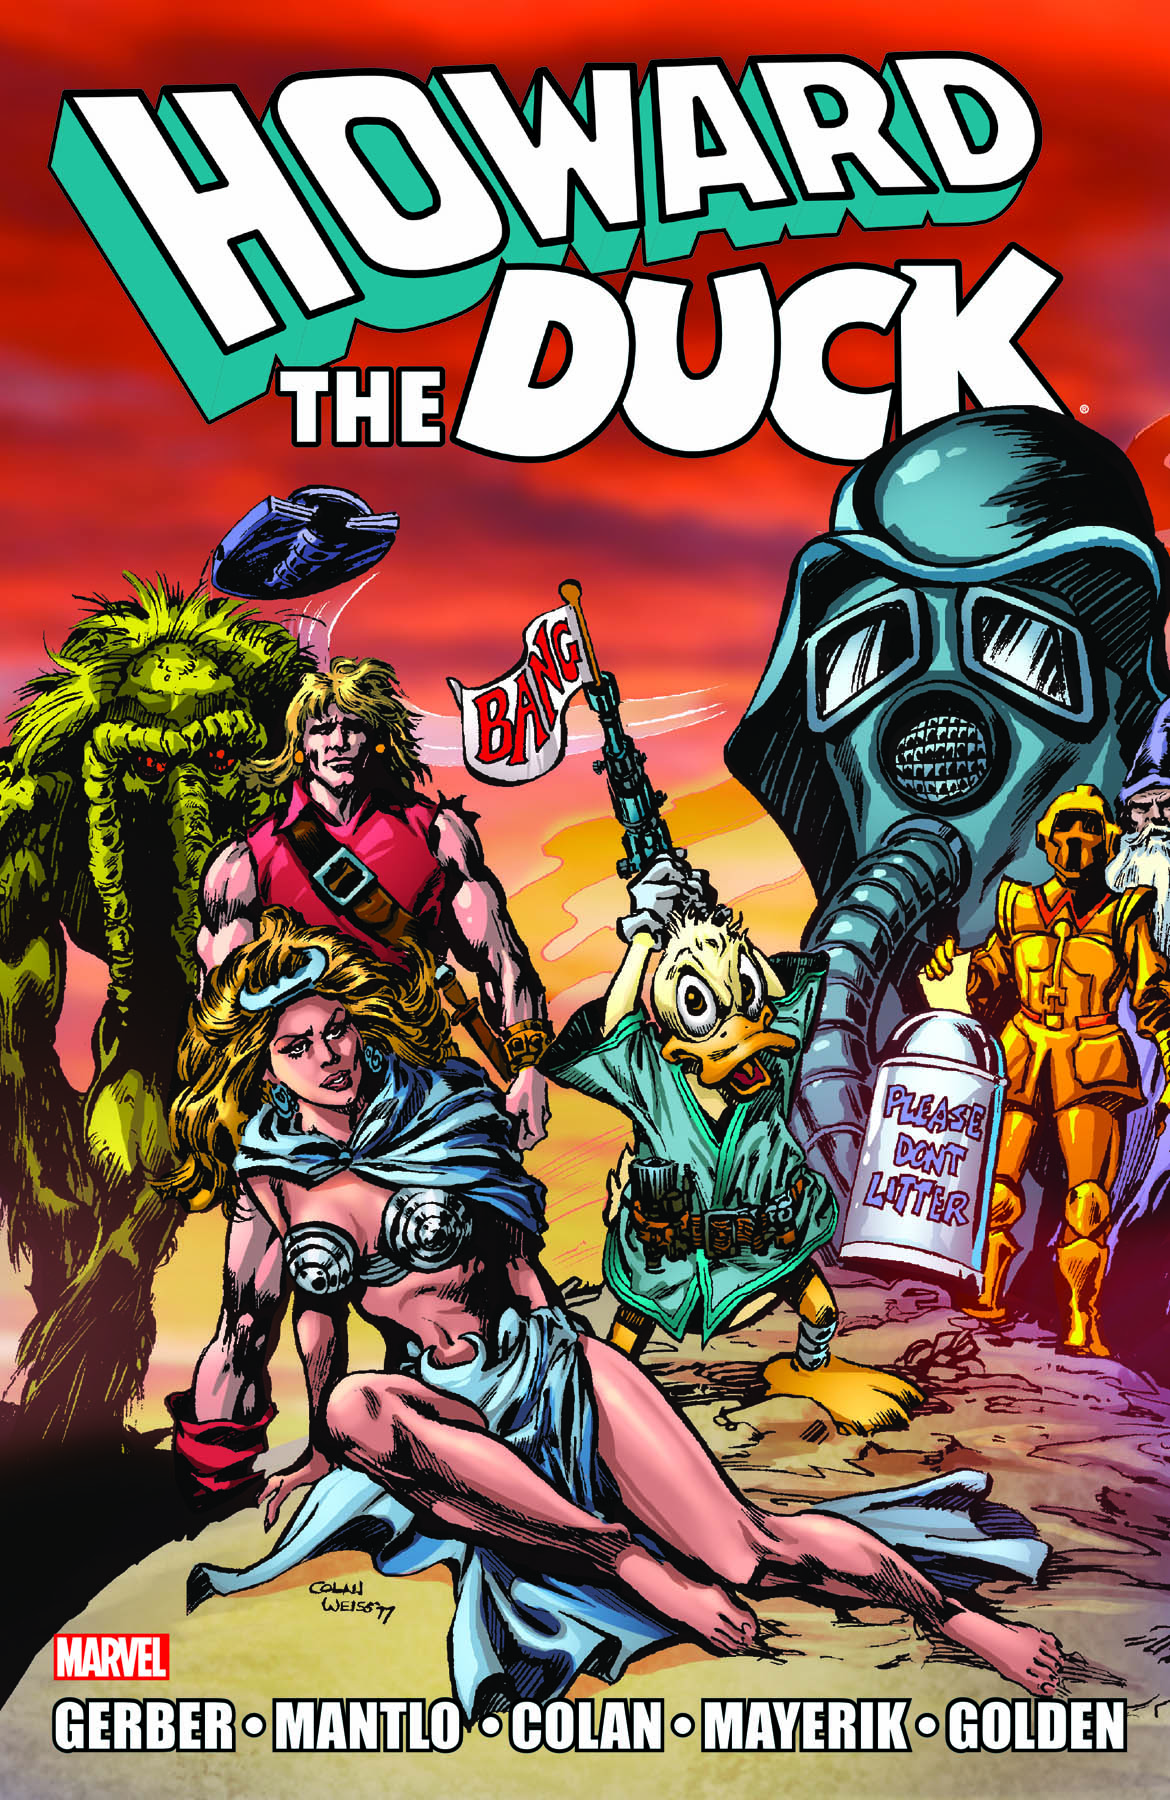 Howard The Duck The Complete Collection Vol 2 Tpb Trade Paperback